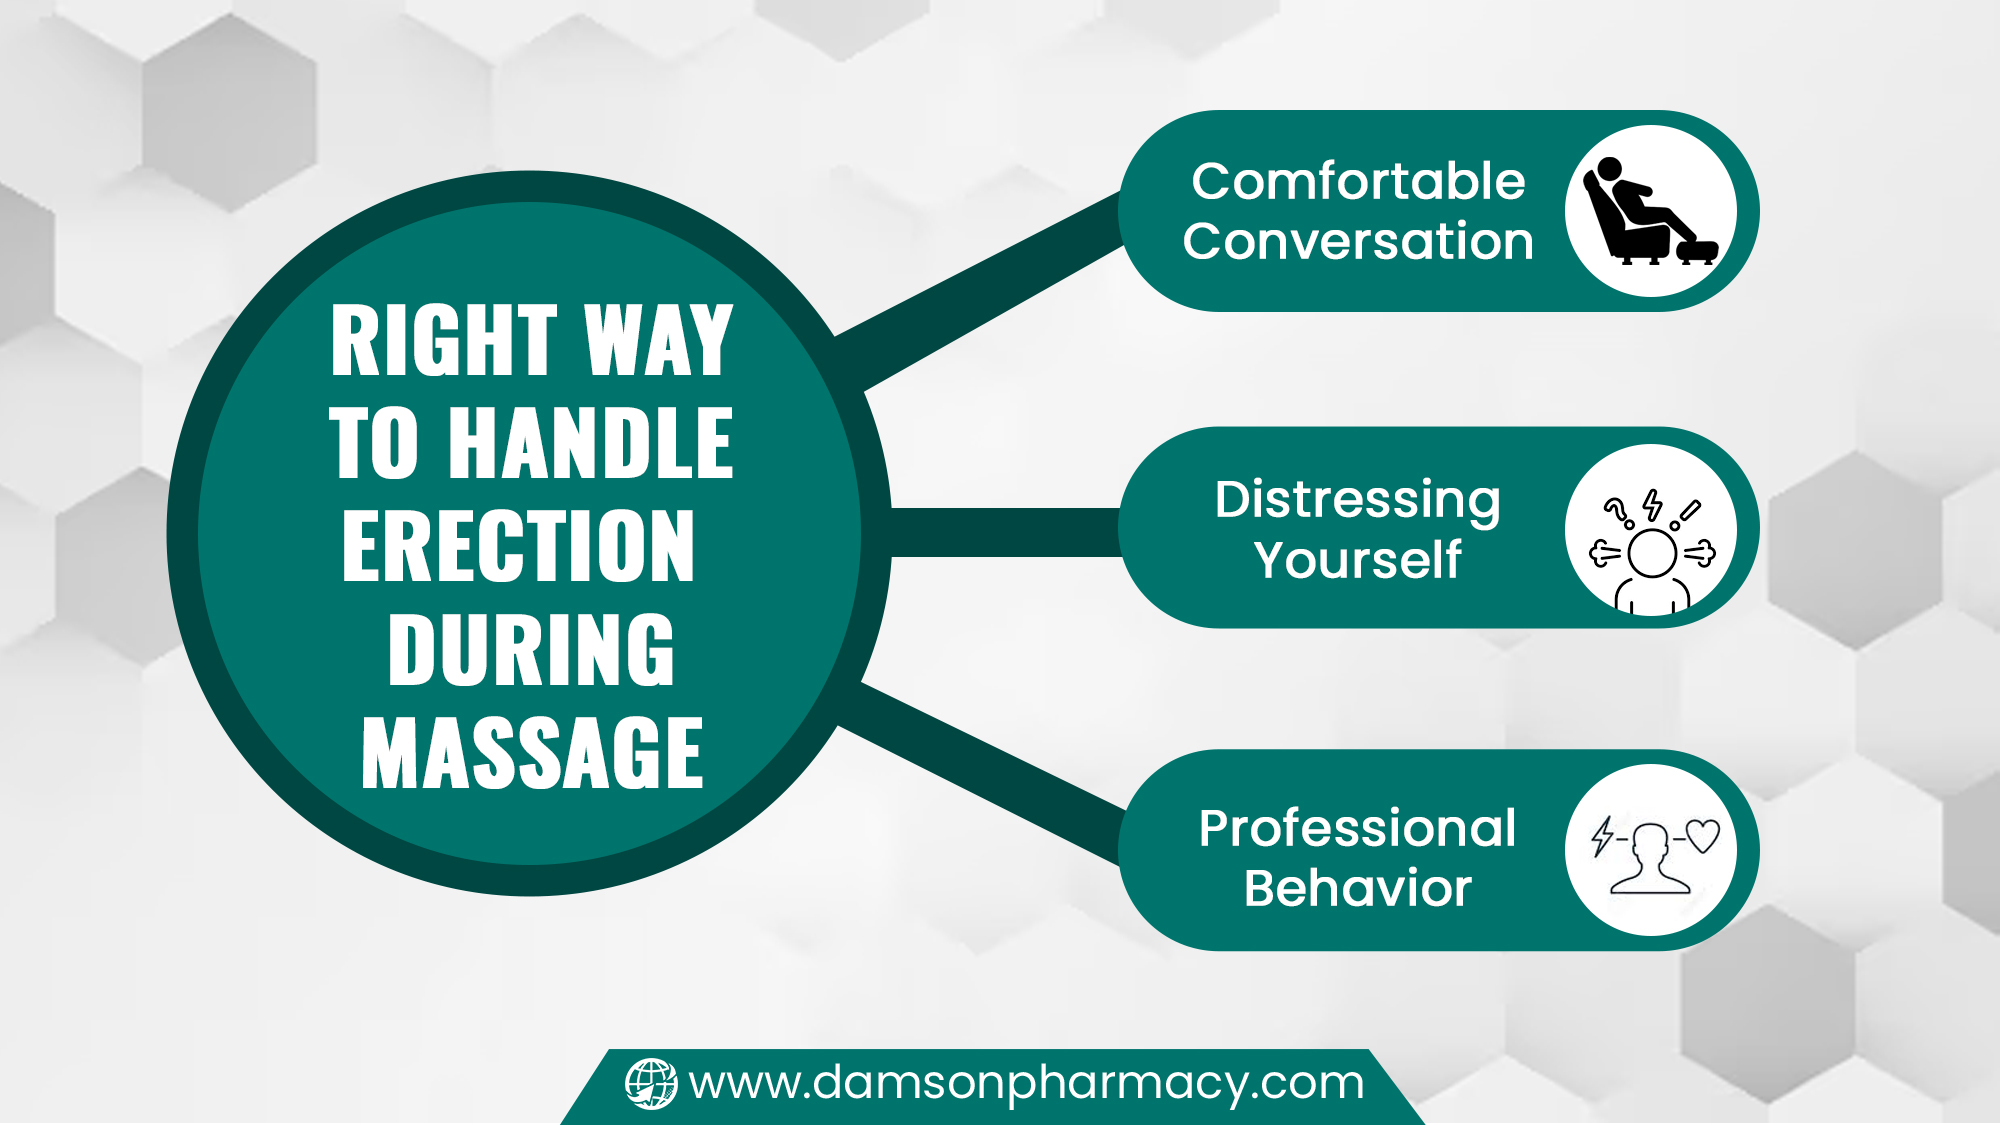 Right Way to Handle Erection During Massage